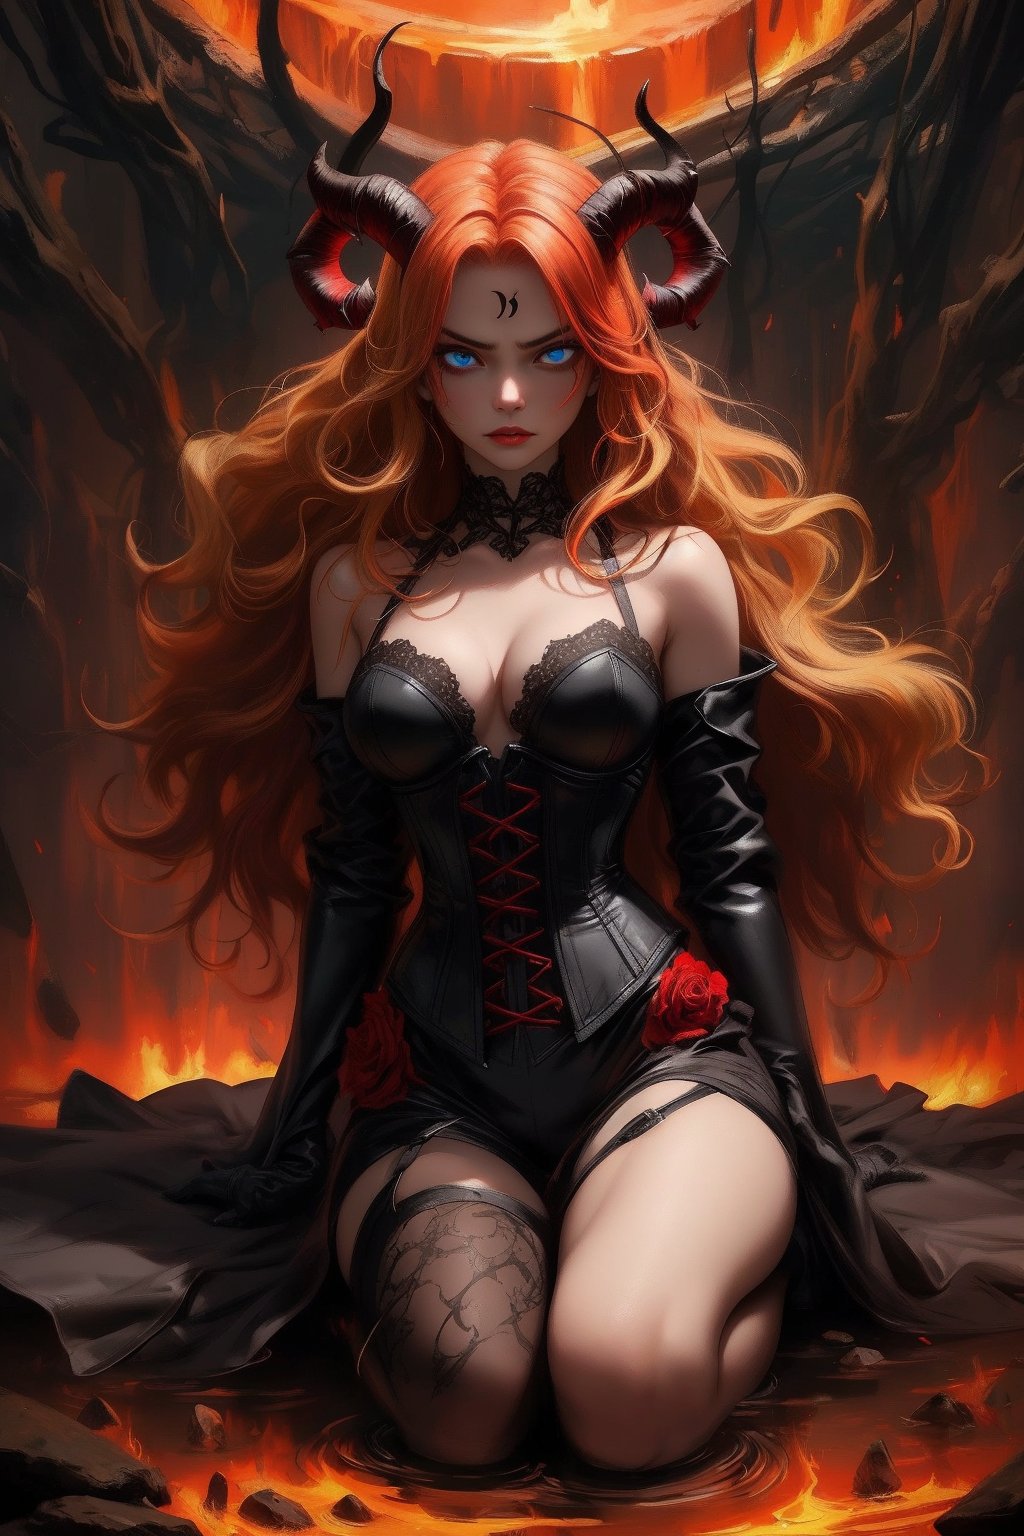 A captivating image of a strikingly beautiful woman who is young and slim, portrayed as a demon woman from the underworld. Her penetrating blue eyes and full lips transmit fear to anyone who looks directly at her. On her head she has a pair of medium-sized red horns, while her long blonde hair with red highlights is carefully loose and adorned with strong highlights. She is dressed in a black corset with red details, equipped with various torture weapons and red gloves. The three-quarter-length full-body depiction shows her with some lost souls around her who dare not touch her, exuding respect and confidence. This high-quality image, whether a painting or photograph, captures his alluring and formidable presence, immersing viewers in his captivating portrait. He has a hard, serious expression, ready to attack without provocation. Dazzling eyes